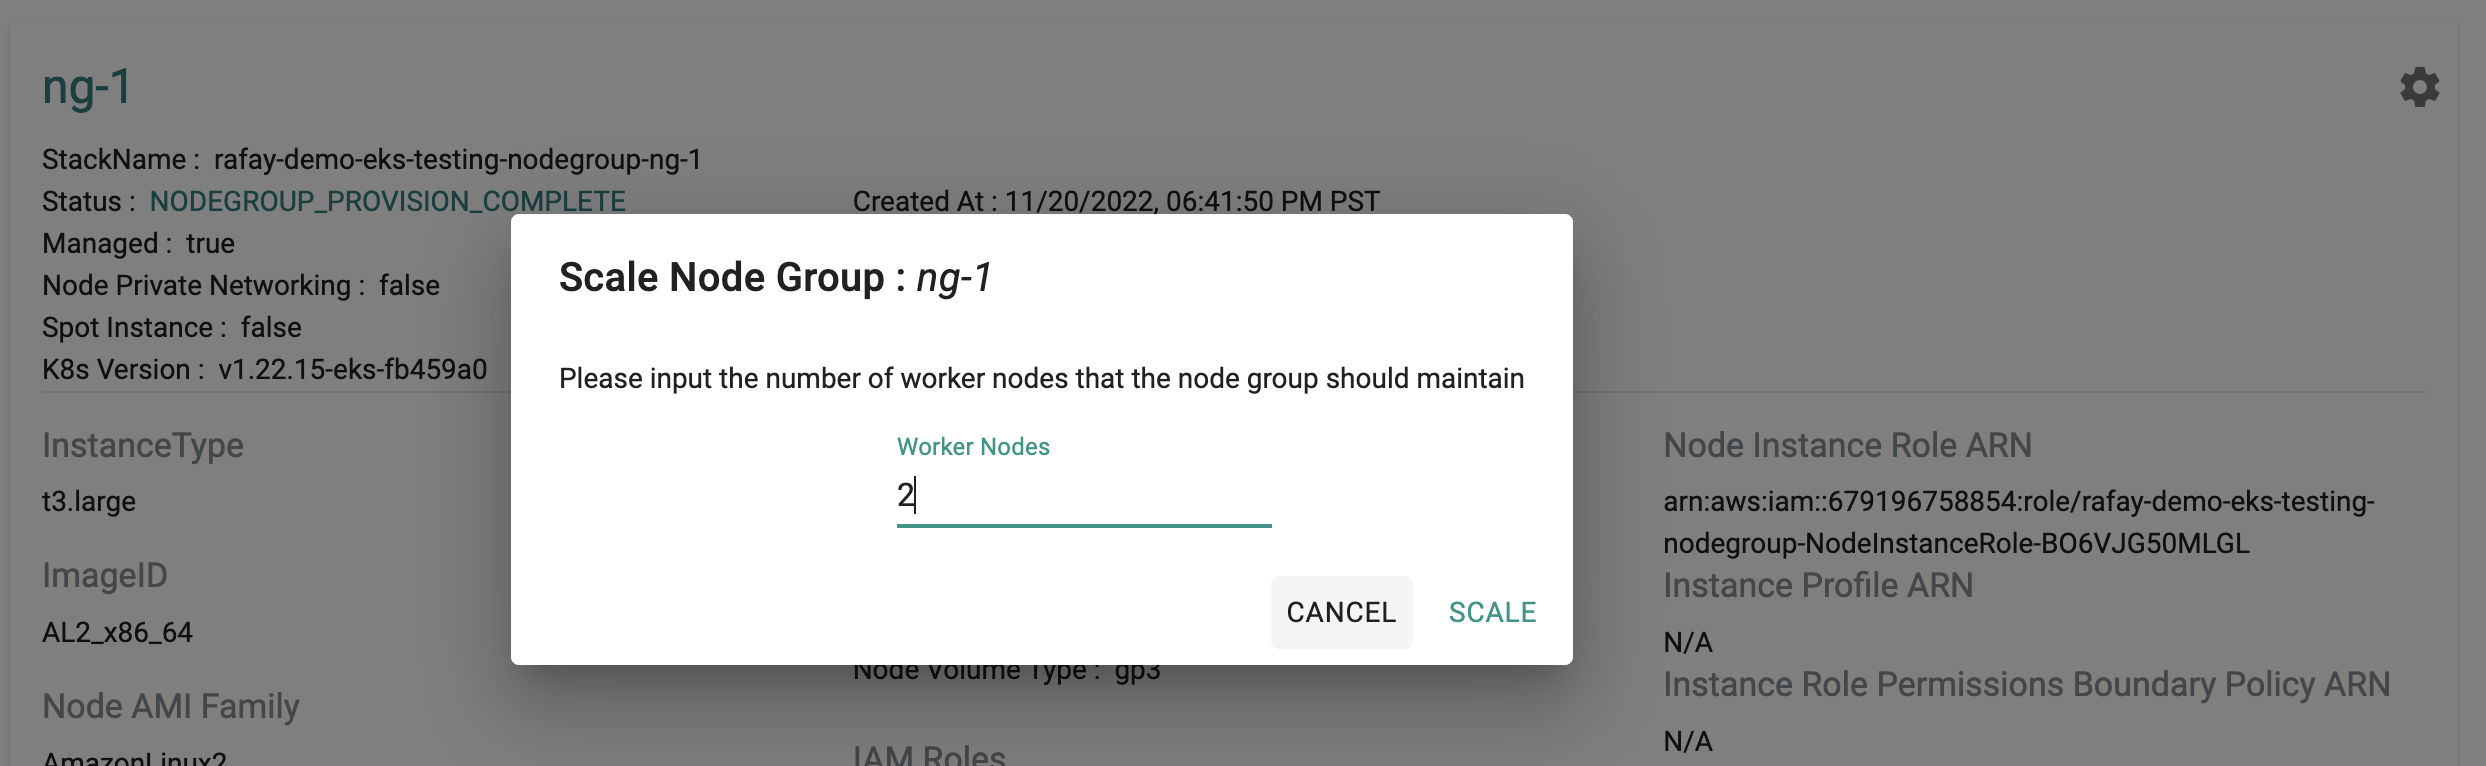 Scale Node Group